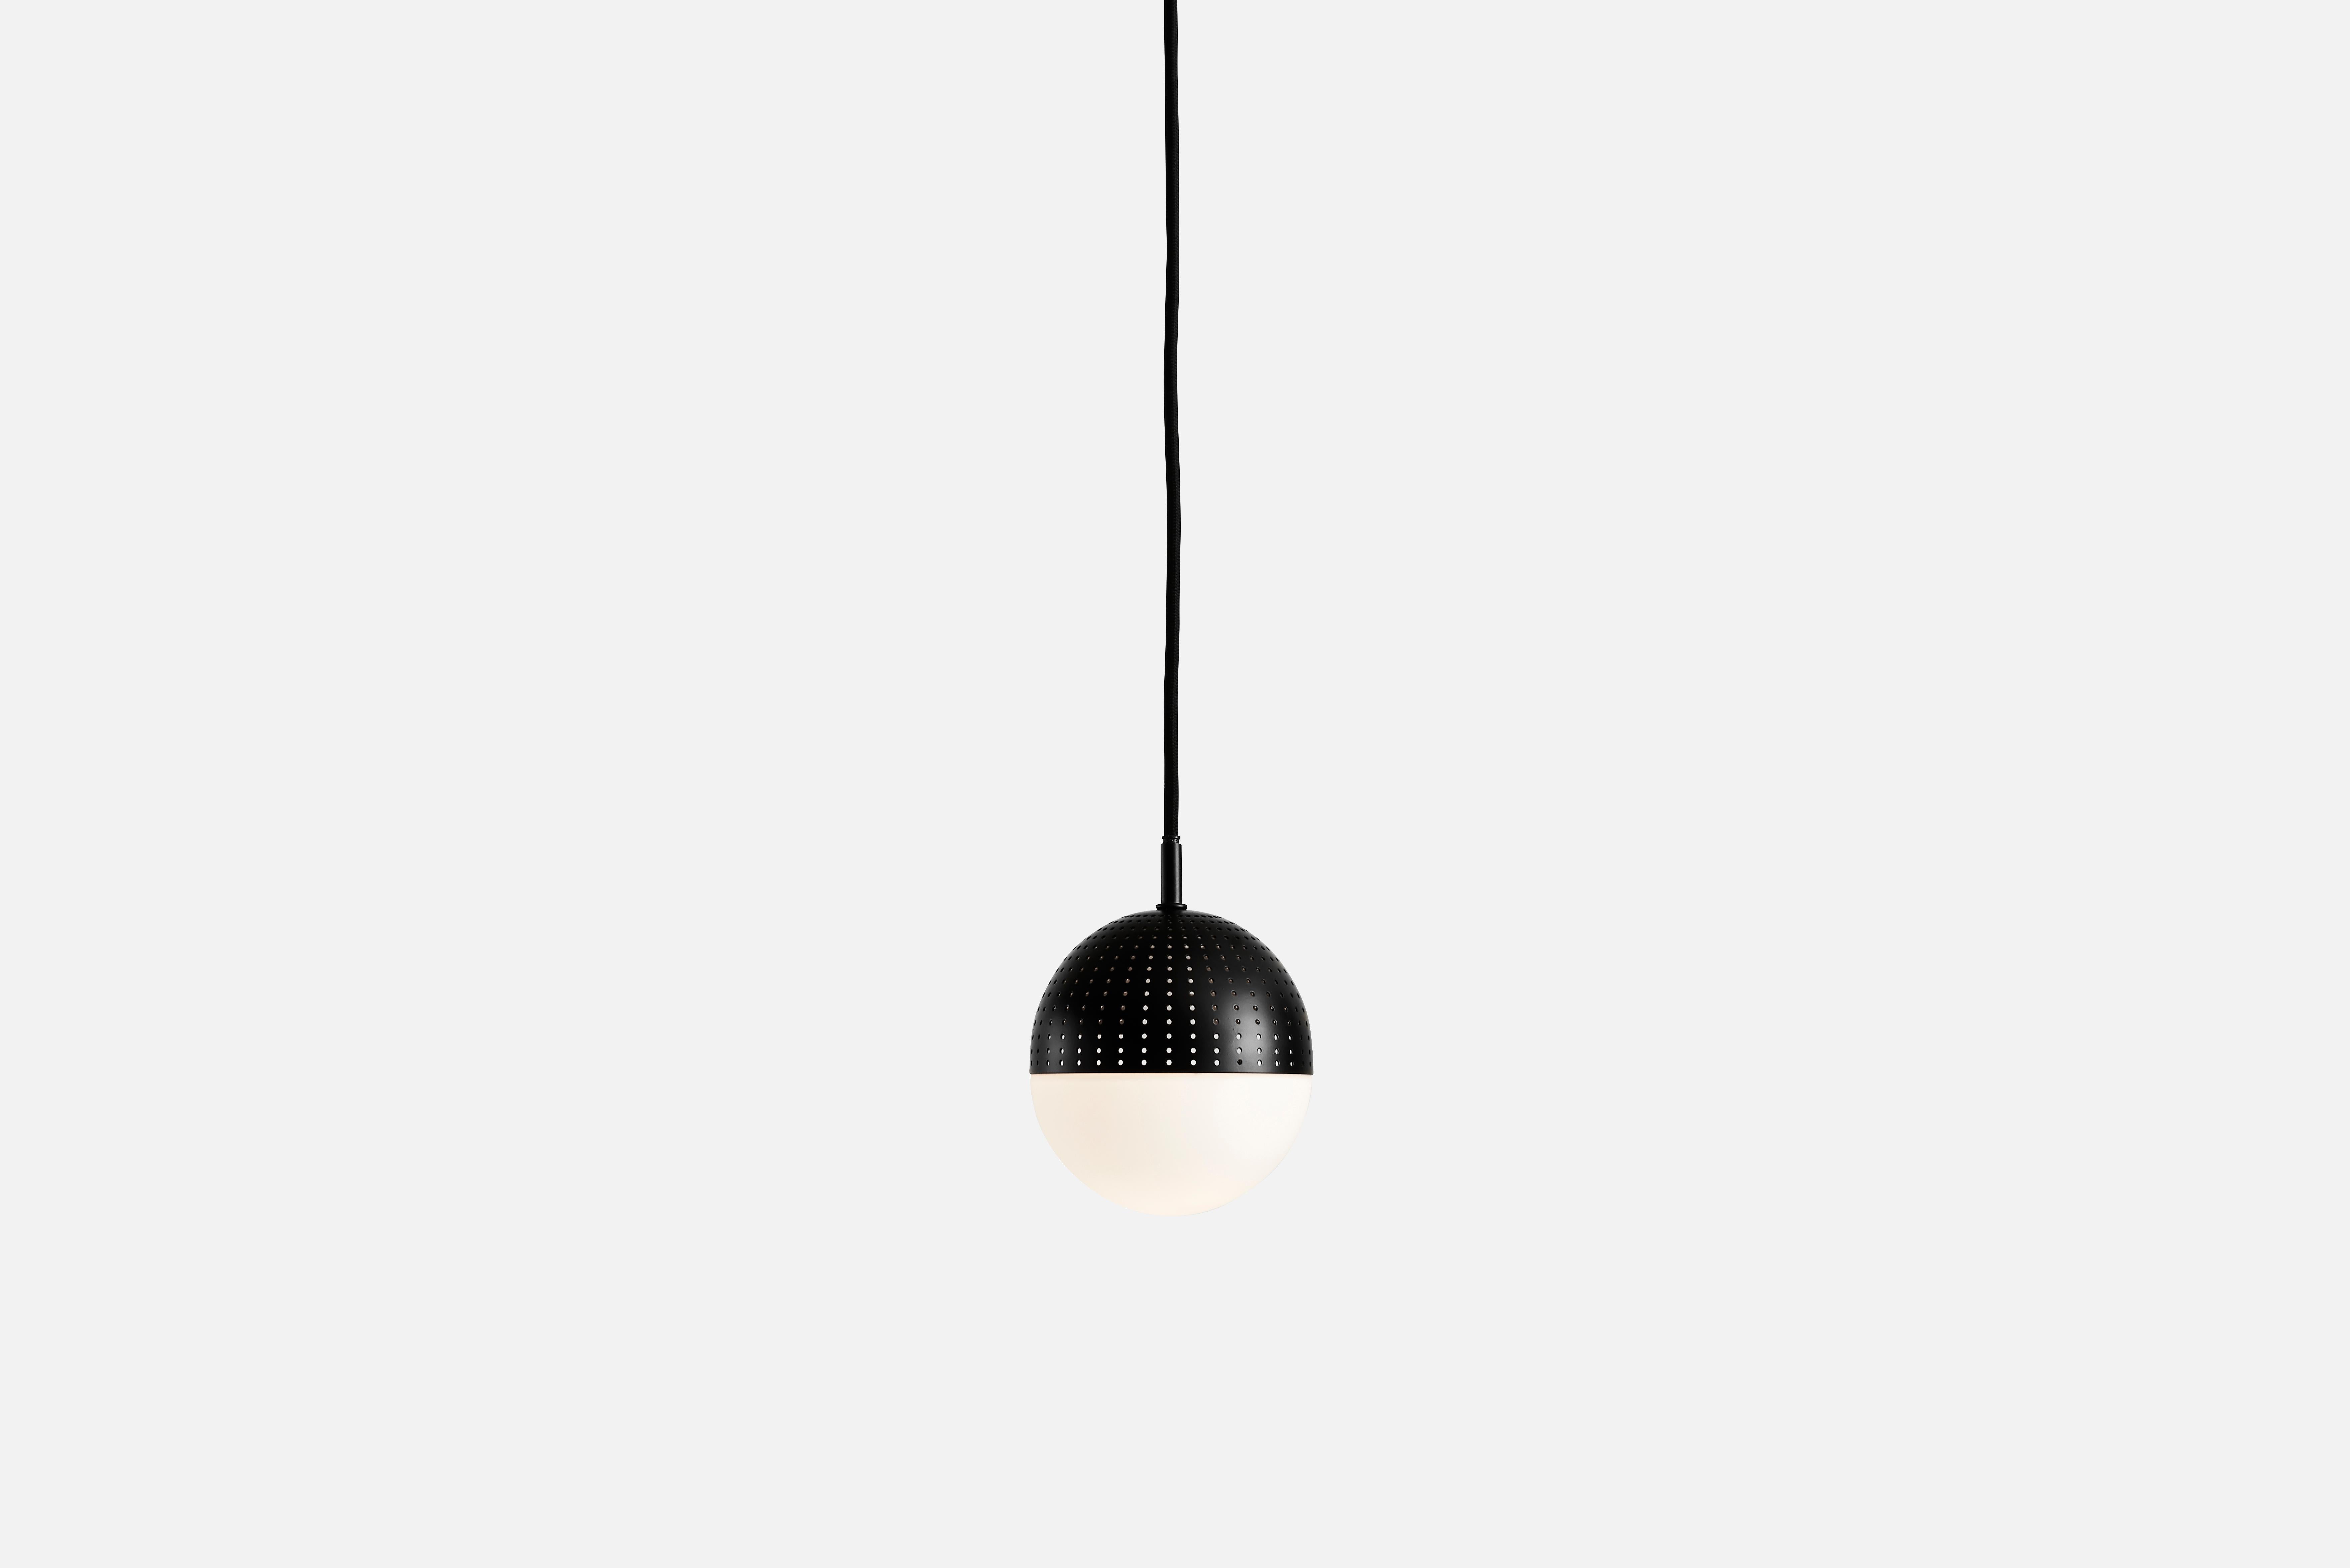 Small black dot pendant lamp by Rikke Frost
Materials: Metal, glass.
Dimensions: D 14 x H 13 cm
Available in black or satin and in 3 sizes: H 13, H 16.6, H 21 cm.

Rikke Frost is a Danish graduate from the School of Architecture Aarhus. Since